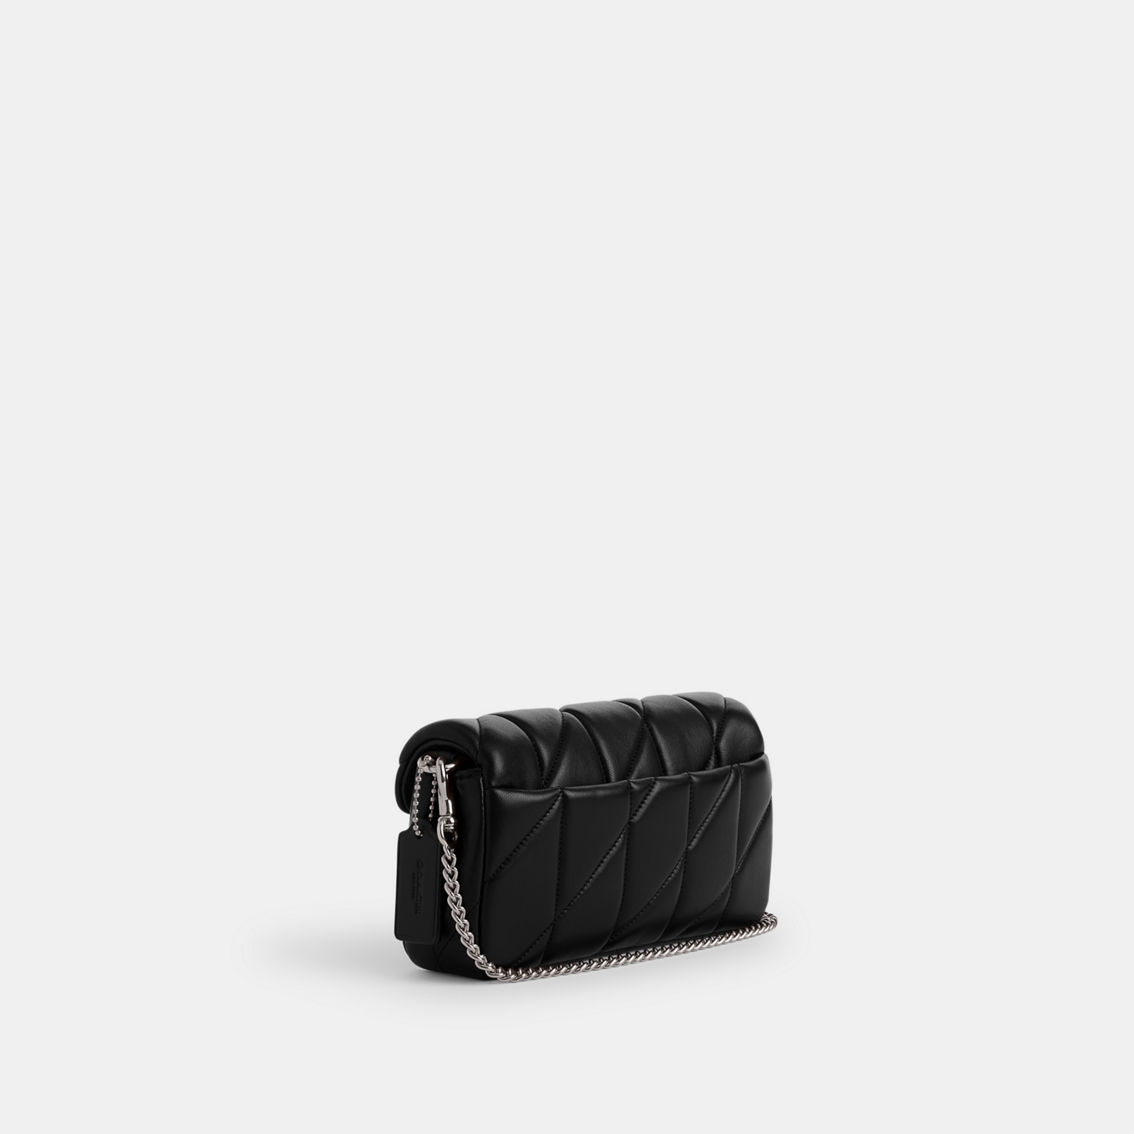 COACH Quilted Pillow Leather Tabby Wristlet with Chain, Black - Image 3 of 6